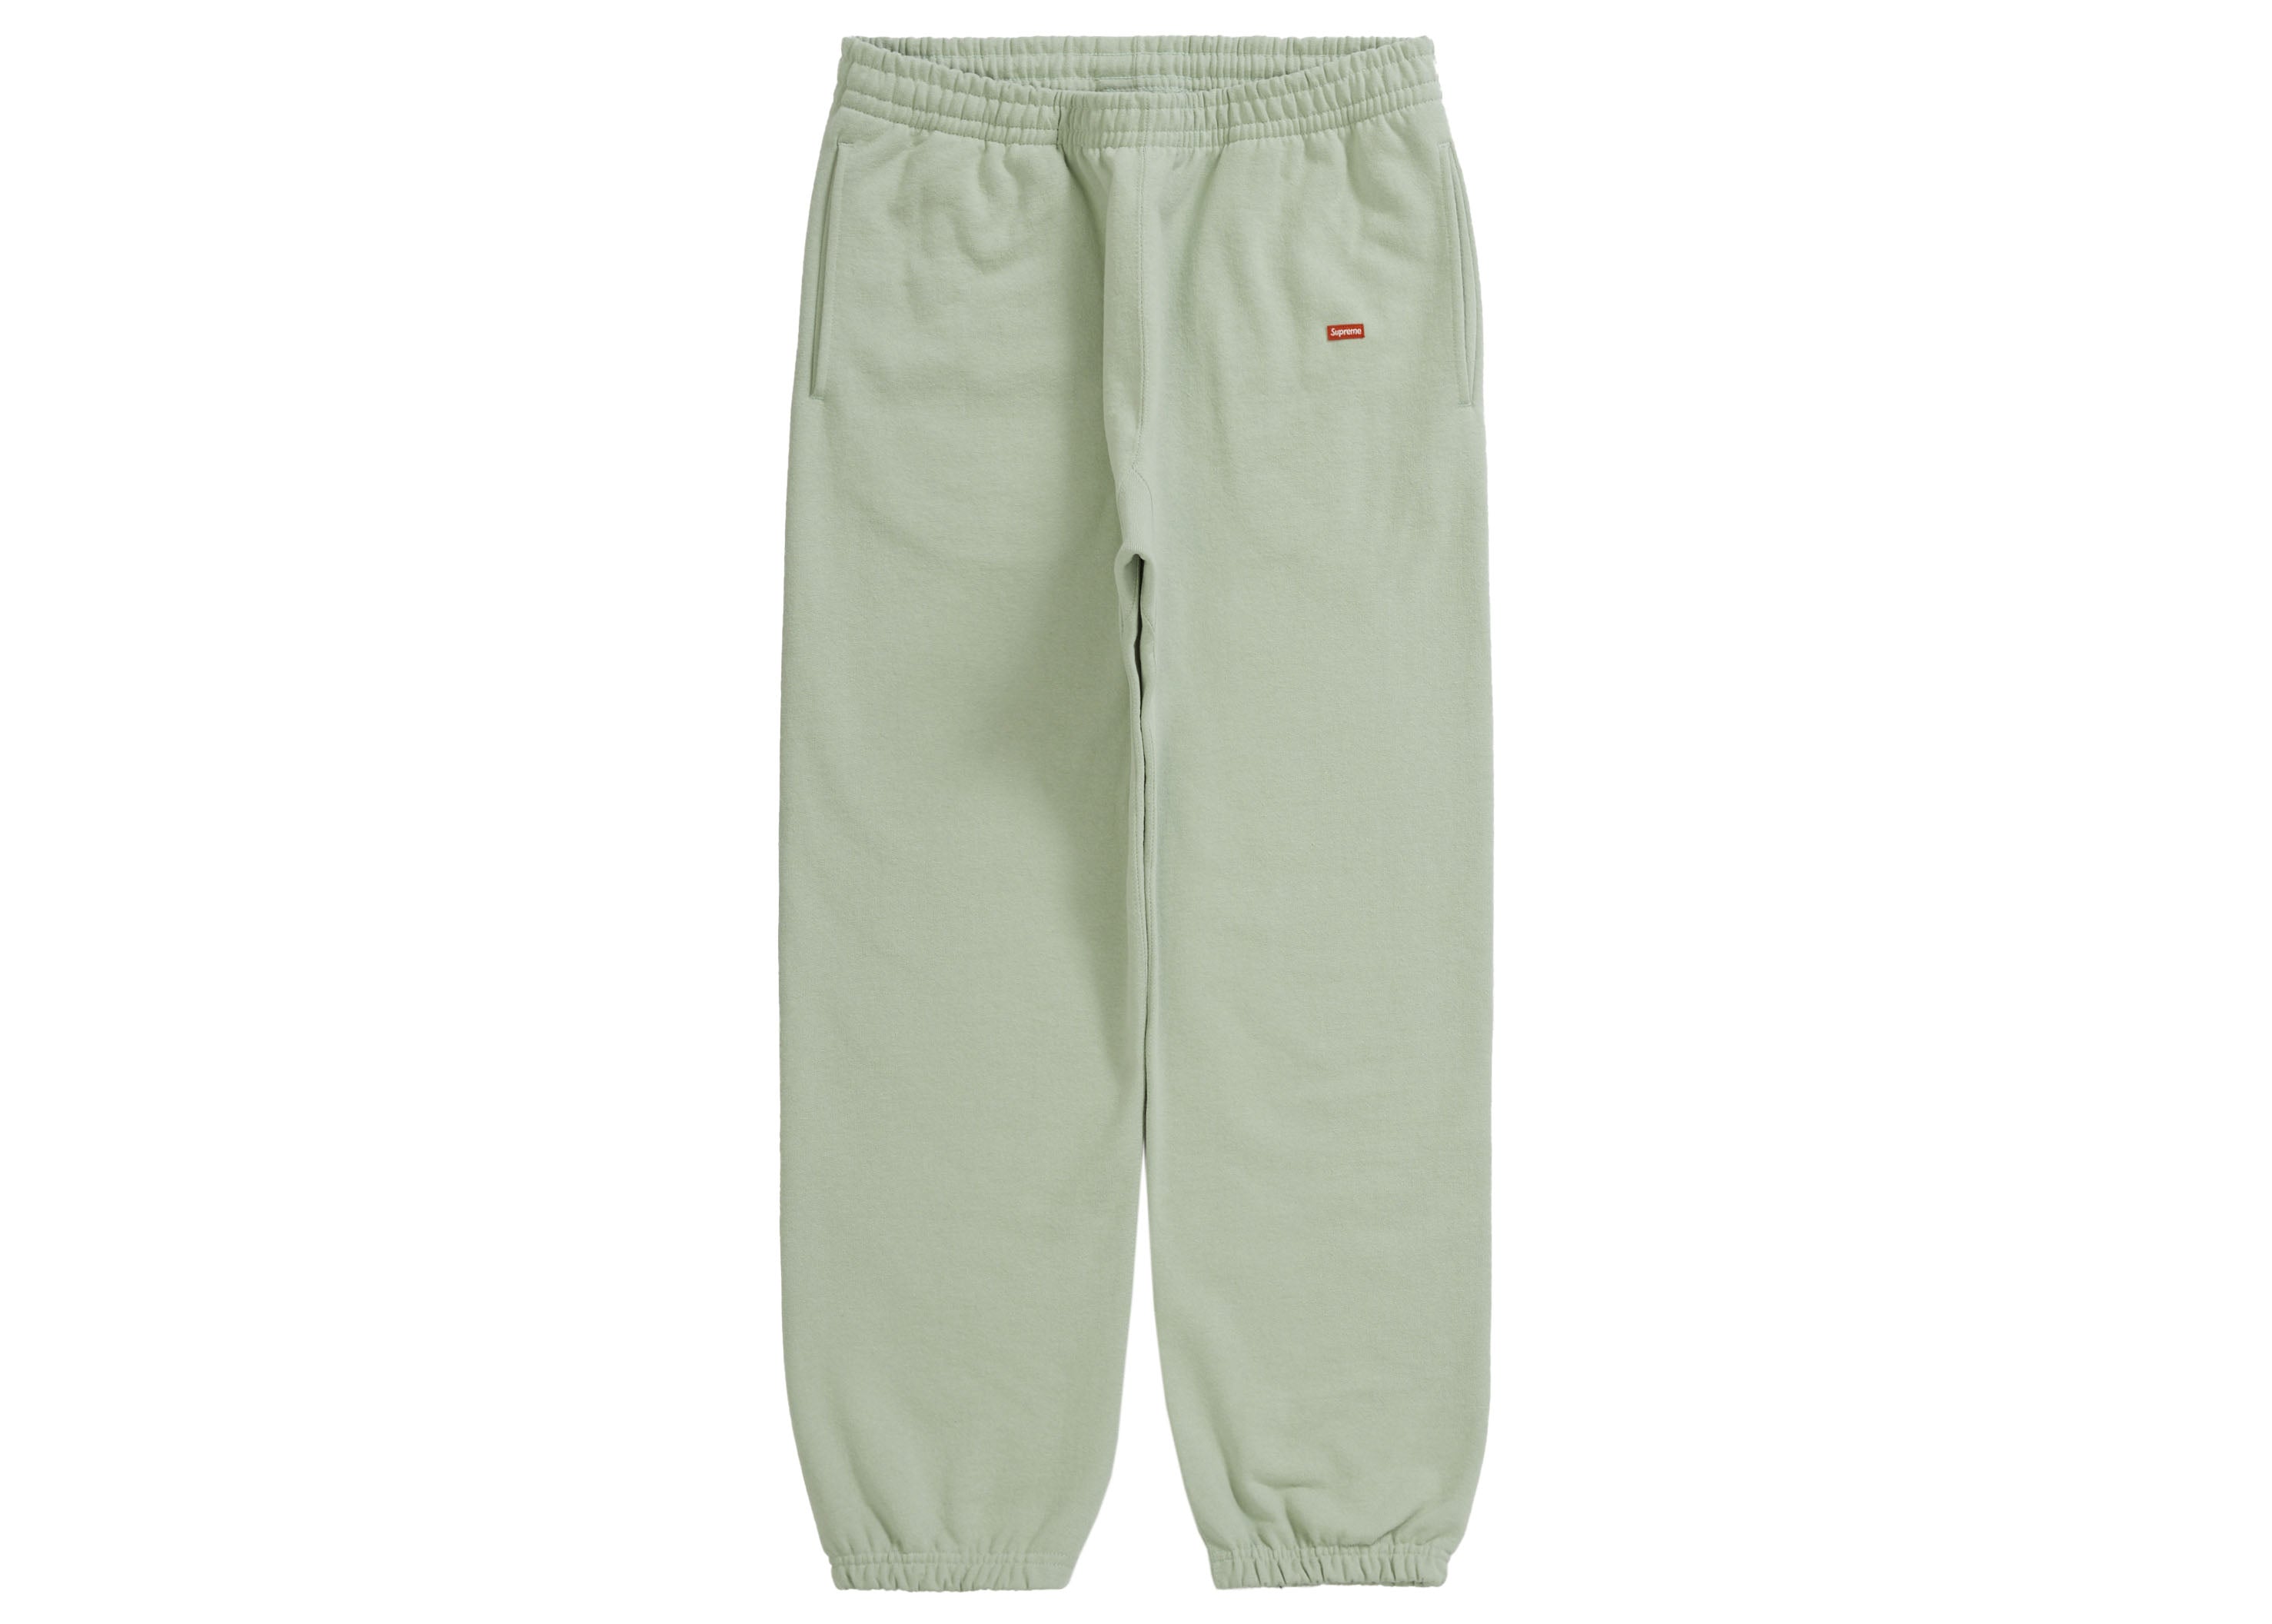 Supreme 2022 SS Unisex Street Style Skater Style Joggers & Sweatpants